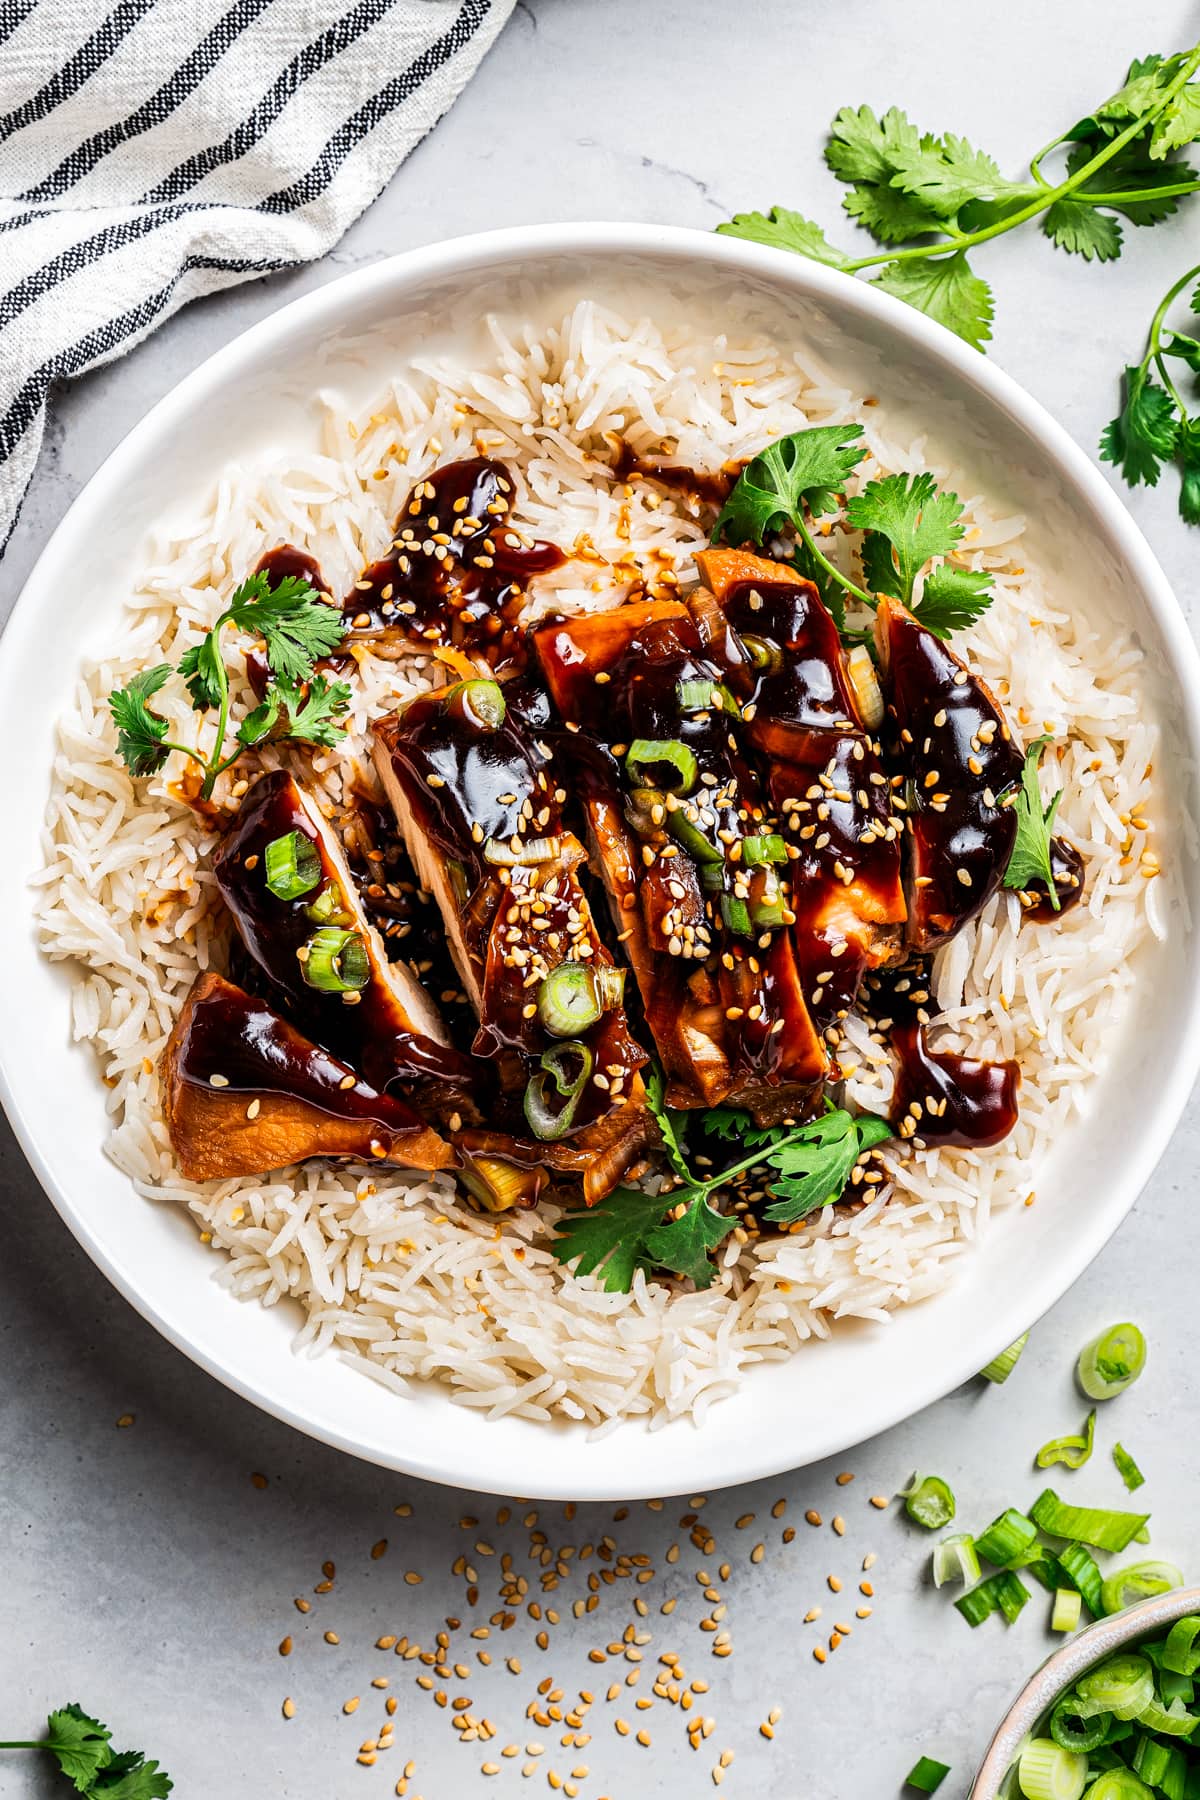 Chicken teriyaki served over rice on a white plate, garnished with green onions and sesame seeds, with a set of chopsticks.